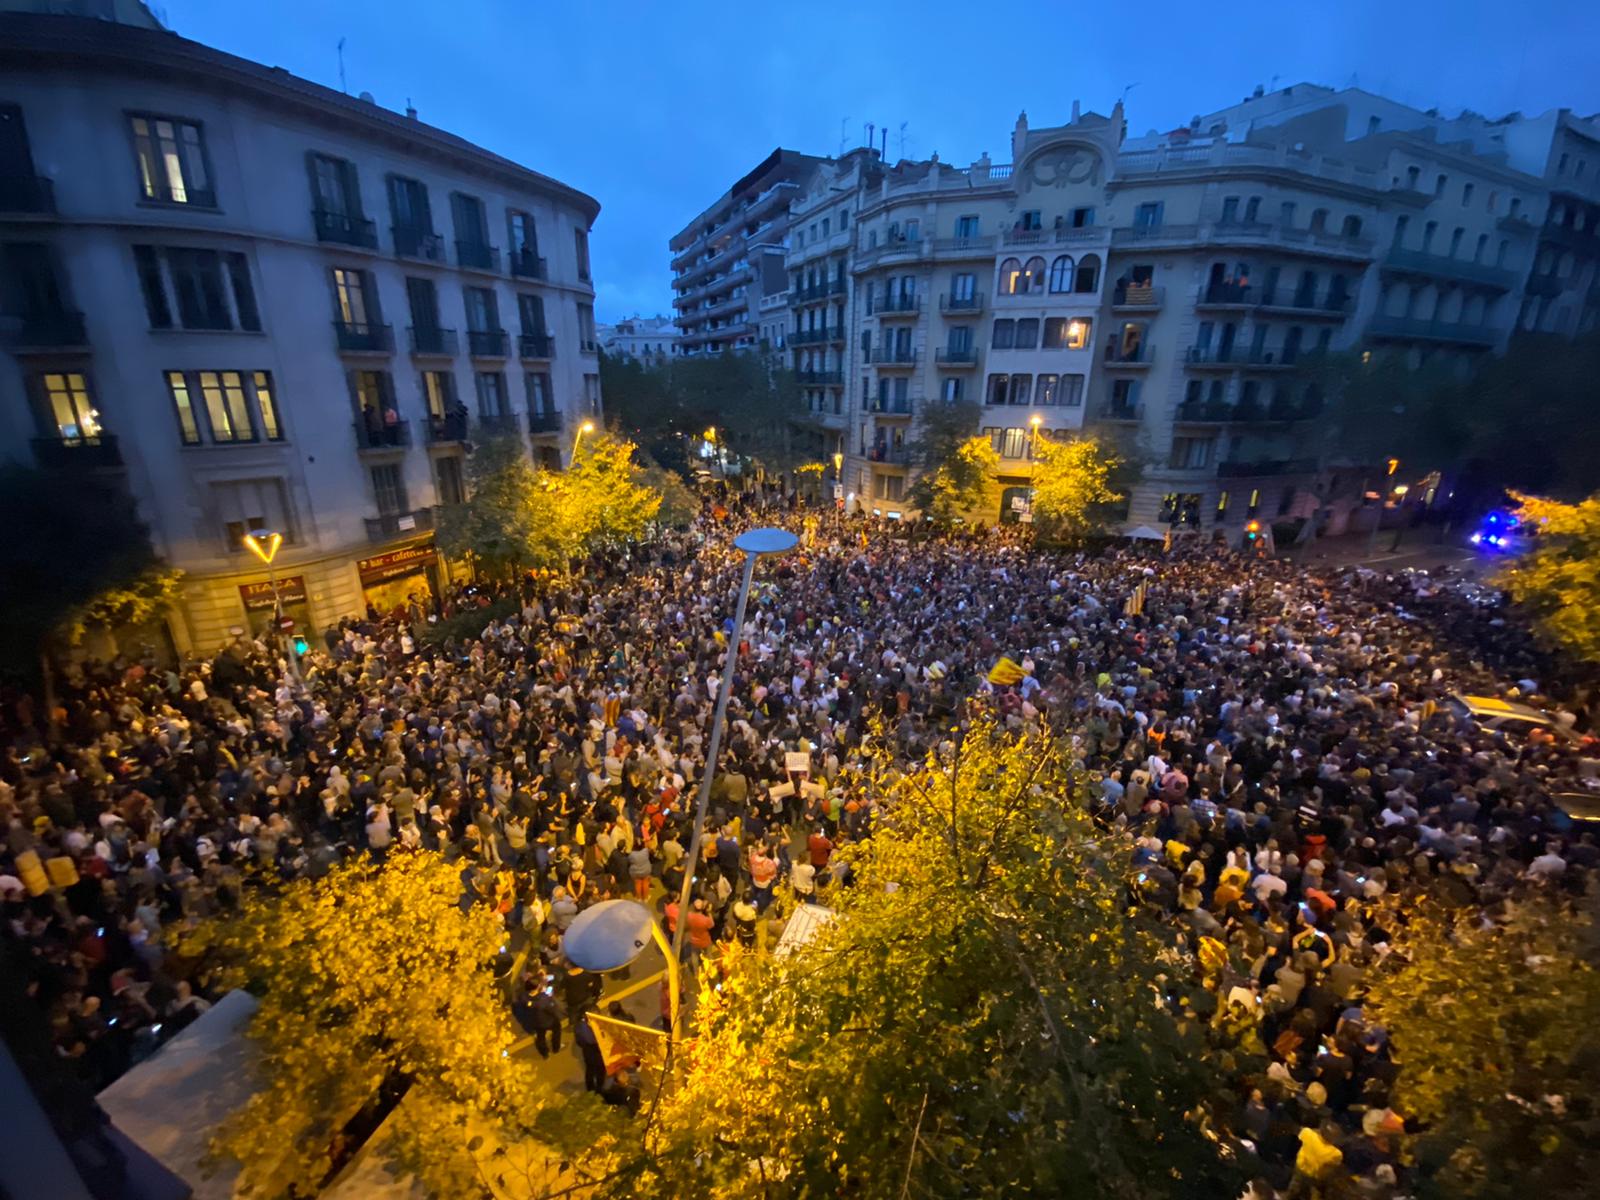 Barcelona protesters bring rubbish to rally: because "the state has become a dump"